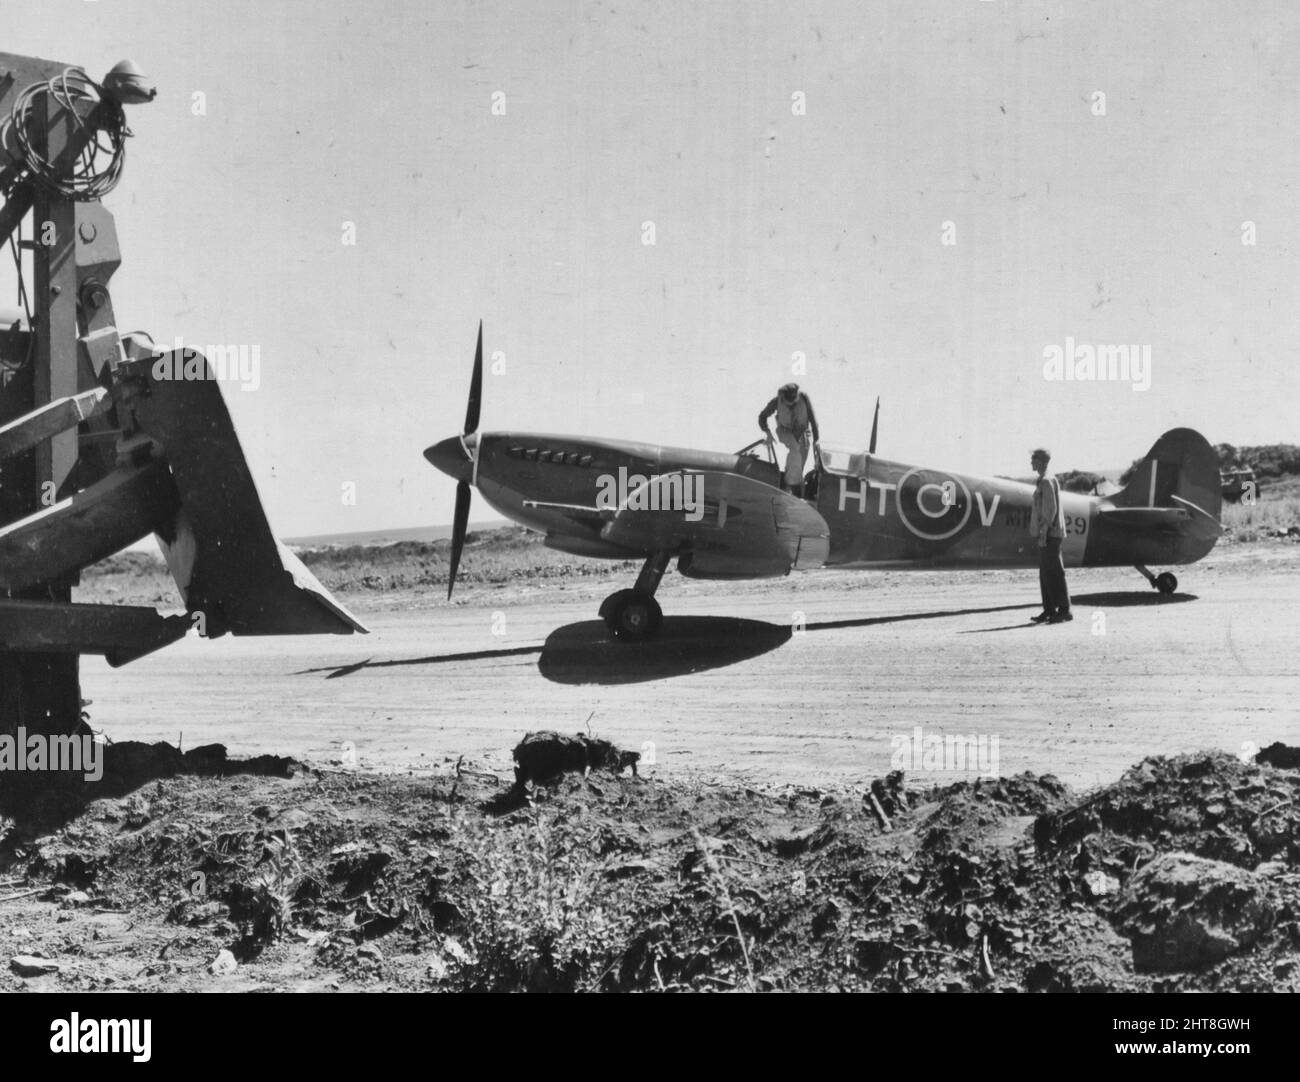 British Spitfire lands on airstrips in Corsica Stock Photo